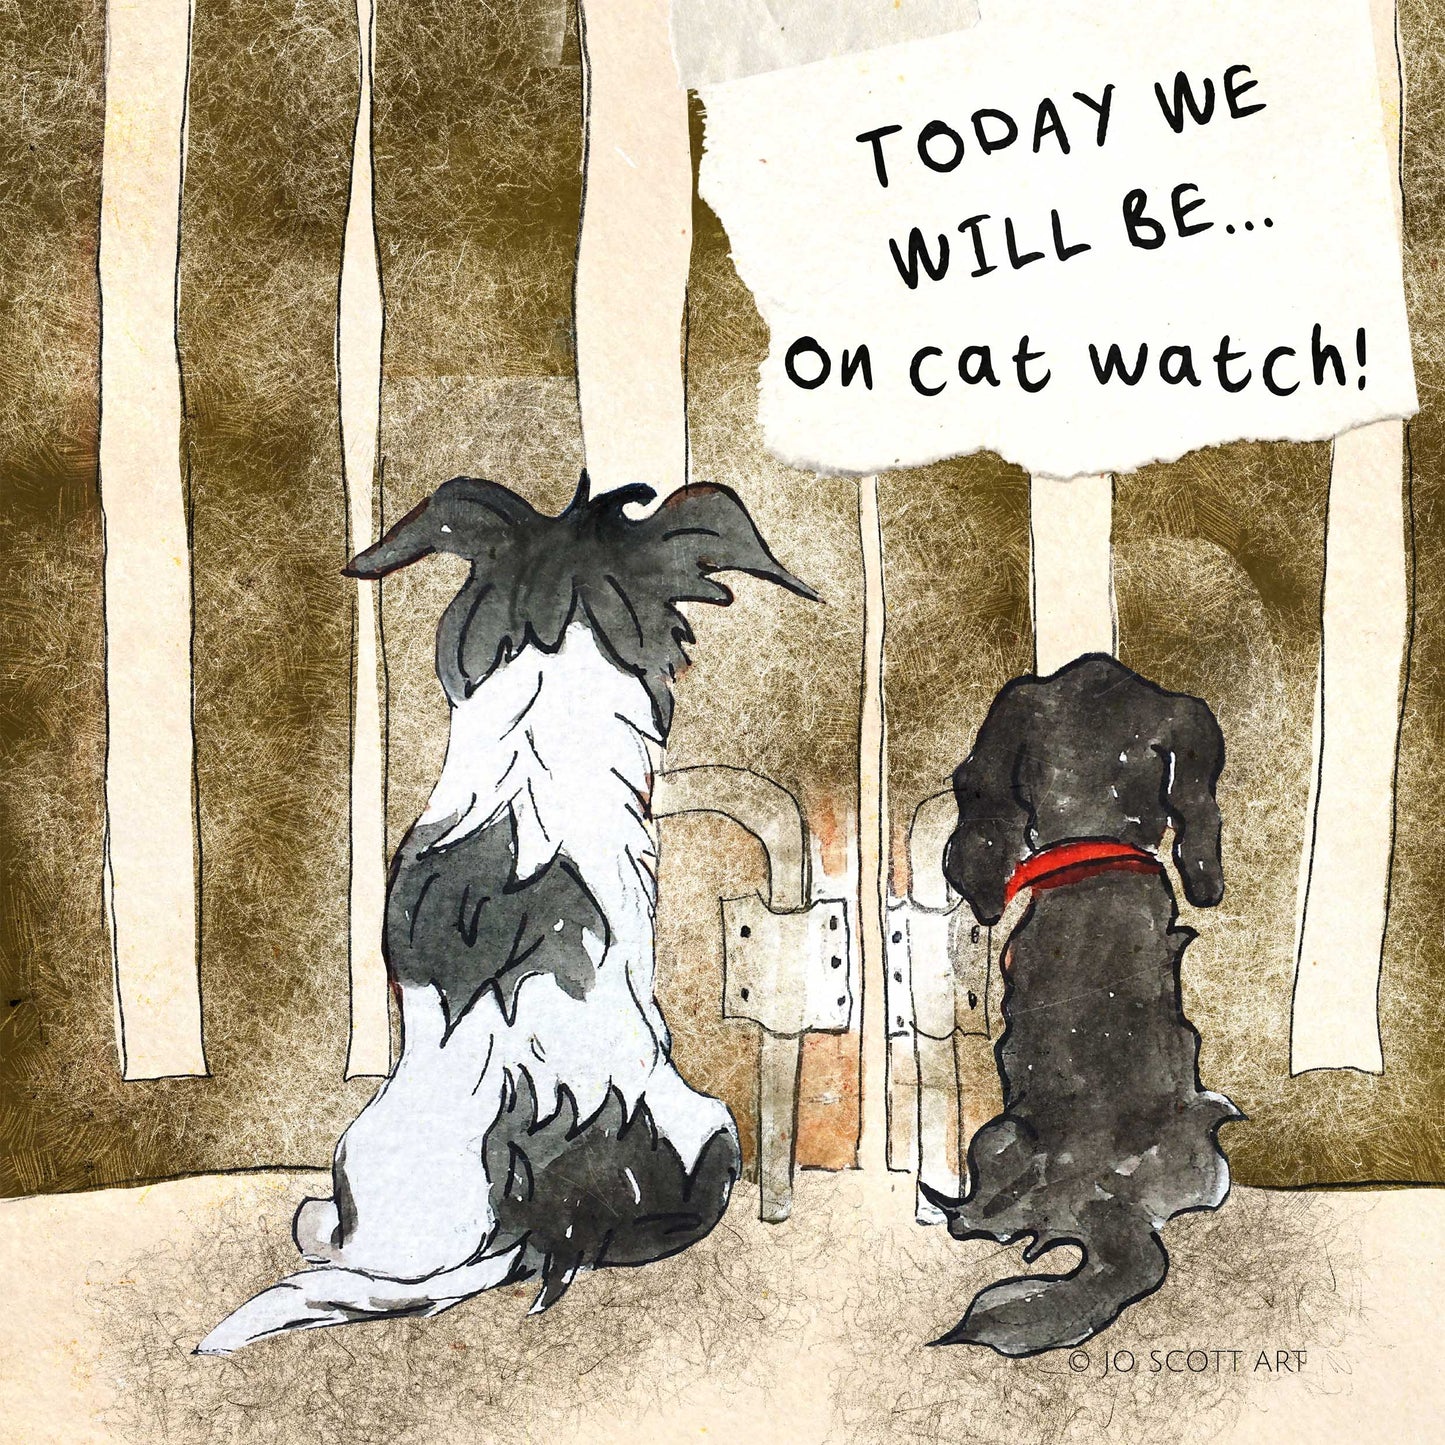 Today we will be... on cat watch - Greeting Card